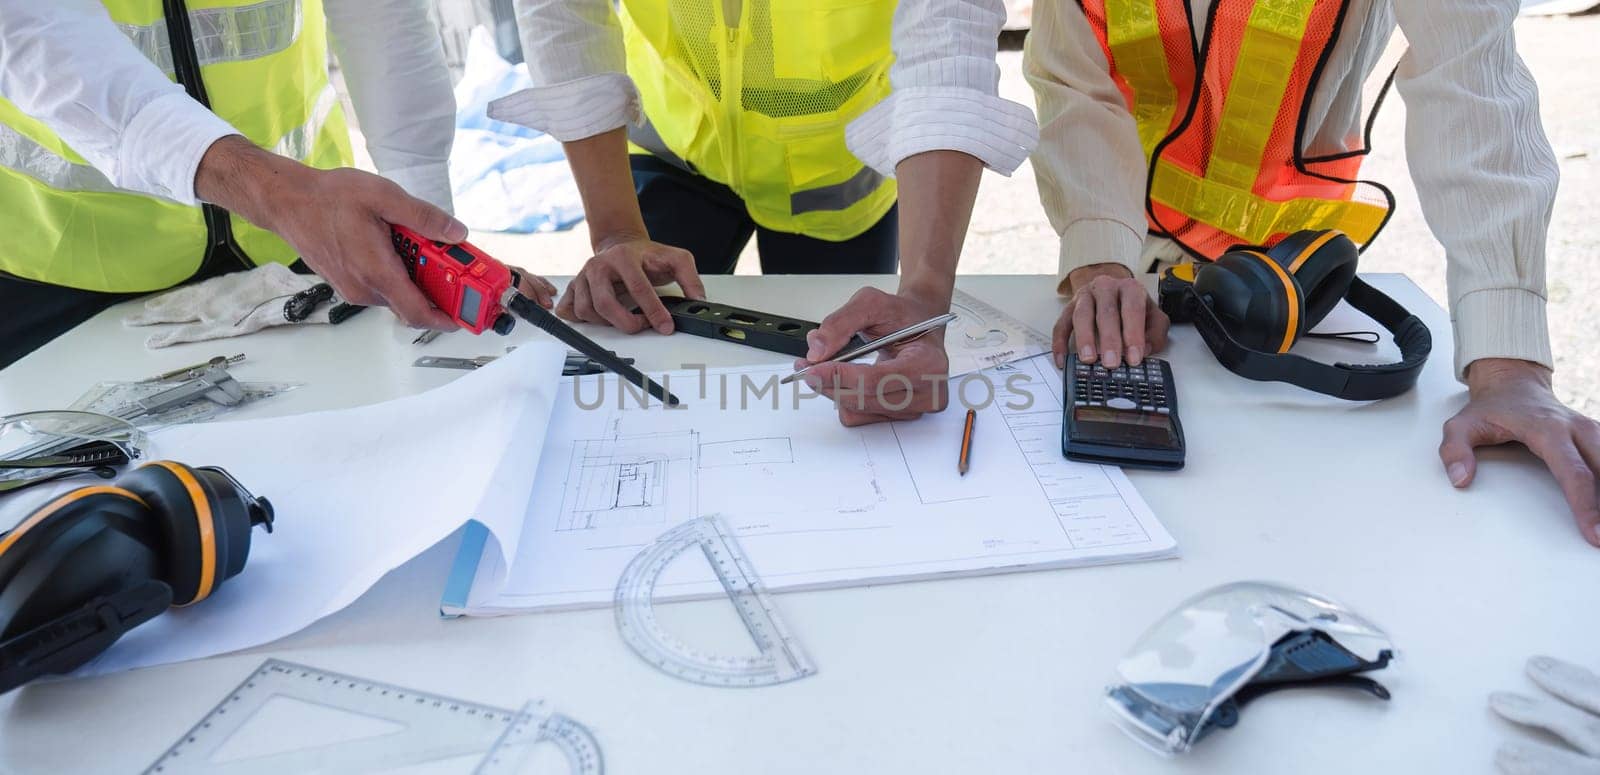 Civil engineering team meets to plan work on construction project in the construction area Foreman, industrial project manager, engineer working as a team Professional team in Asian industry by wichayada